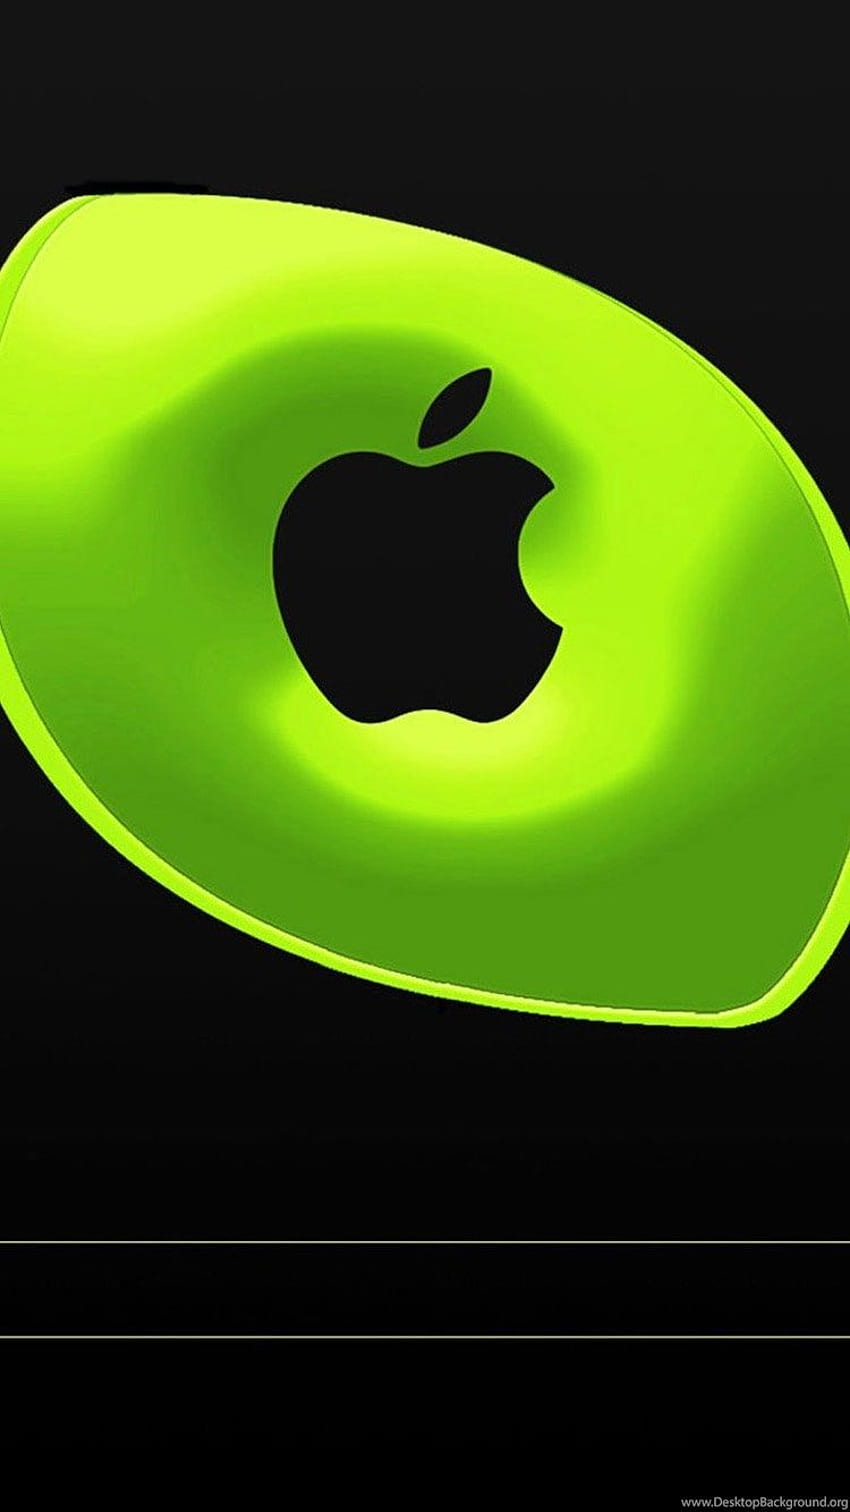 Green Apple Logo - iPad Retina Wallpaper for iPhone 11, Pro Max, X, 8, 7, 6  - Free Download on 3Wallpapers